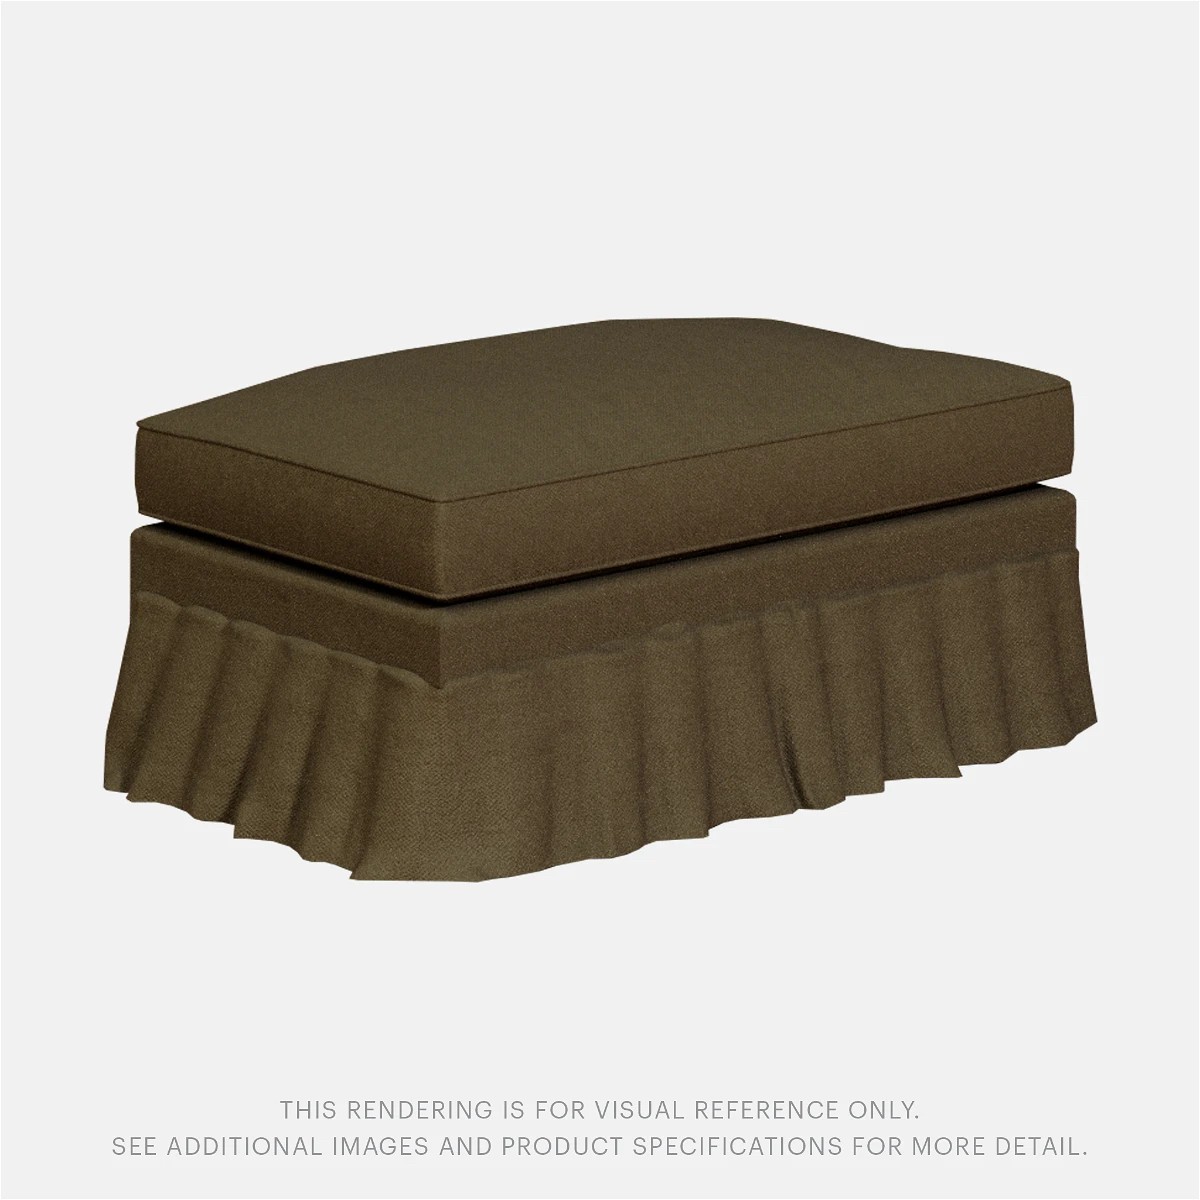 The image of an Lilac Ottoman product